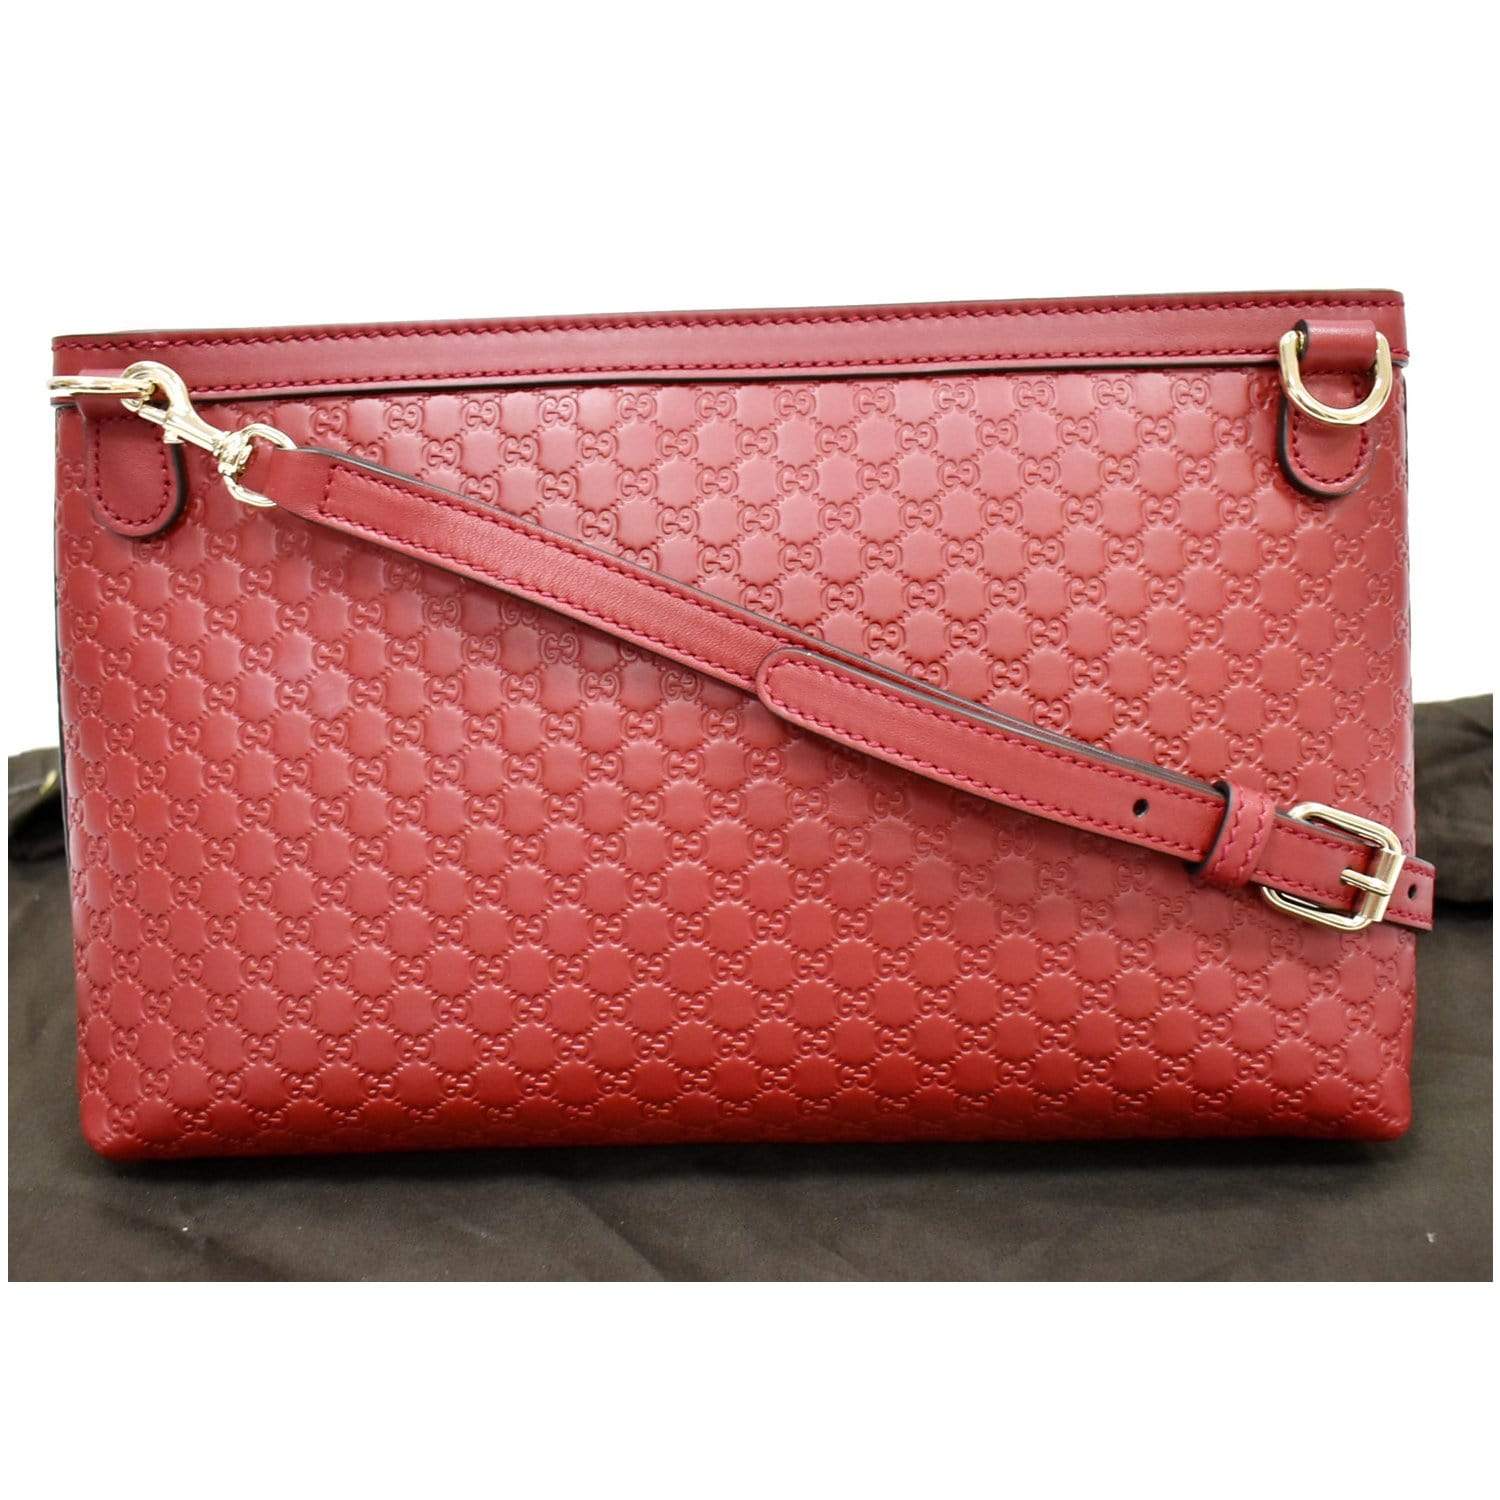 Gucci Red Microguccissima Leather Tablet Case Pony-style calfskin